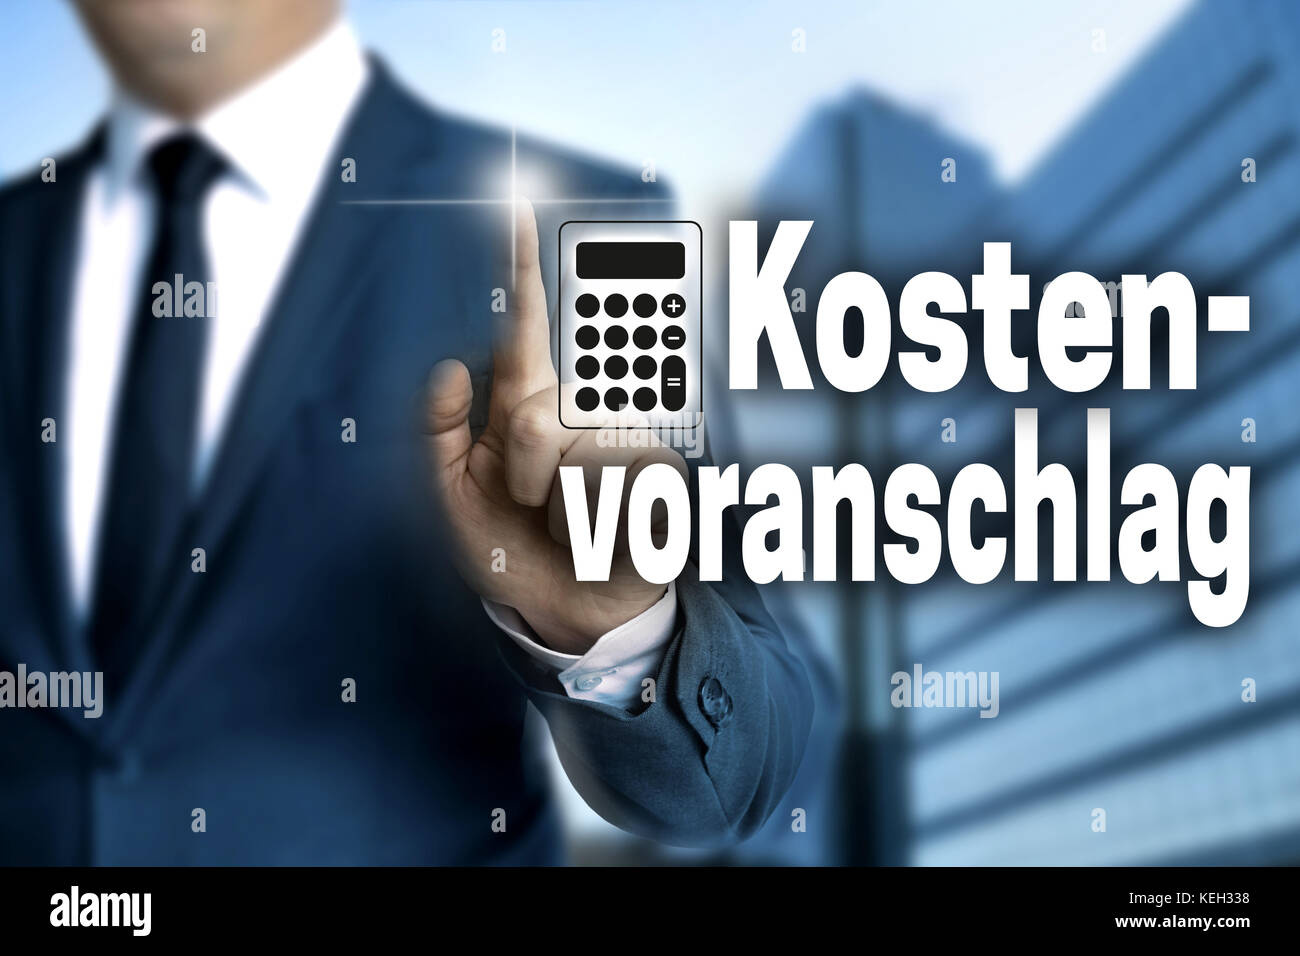 Kostenvoranschlag (in german Cost estimate) touchscreen is operated by businessman. Stock Photo